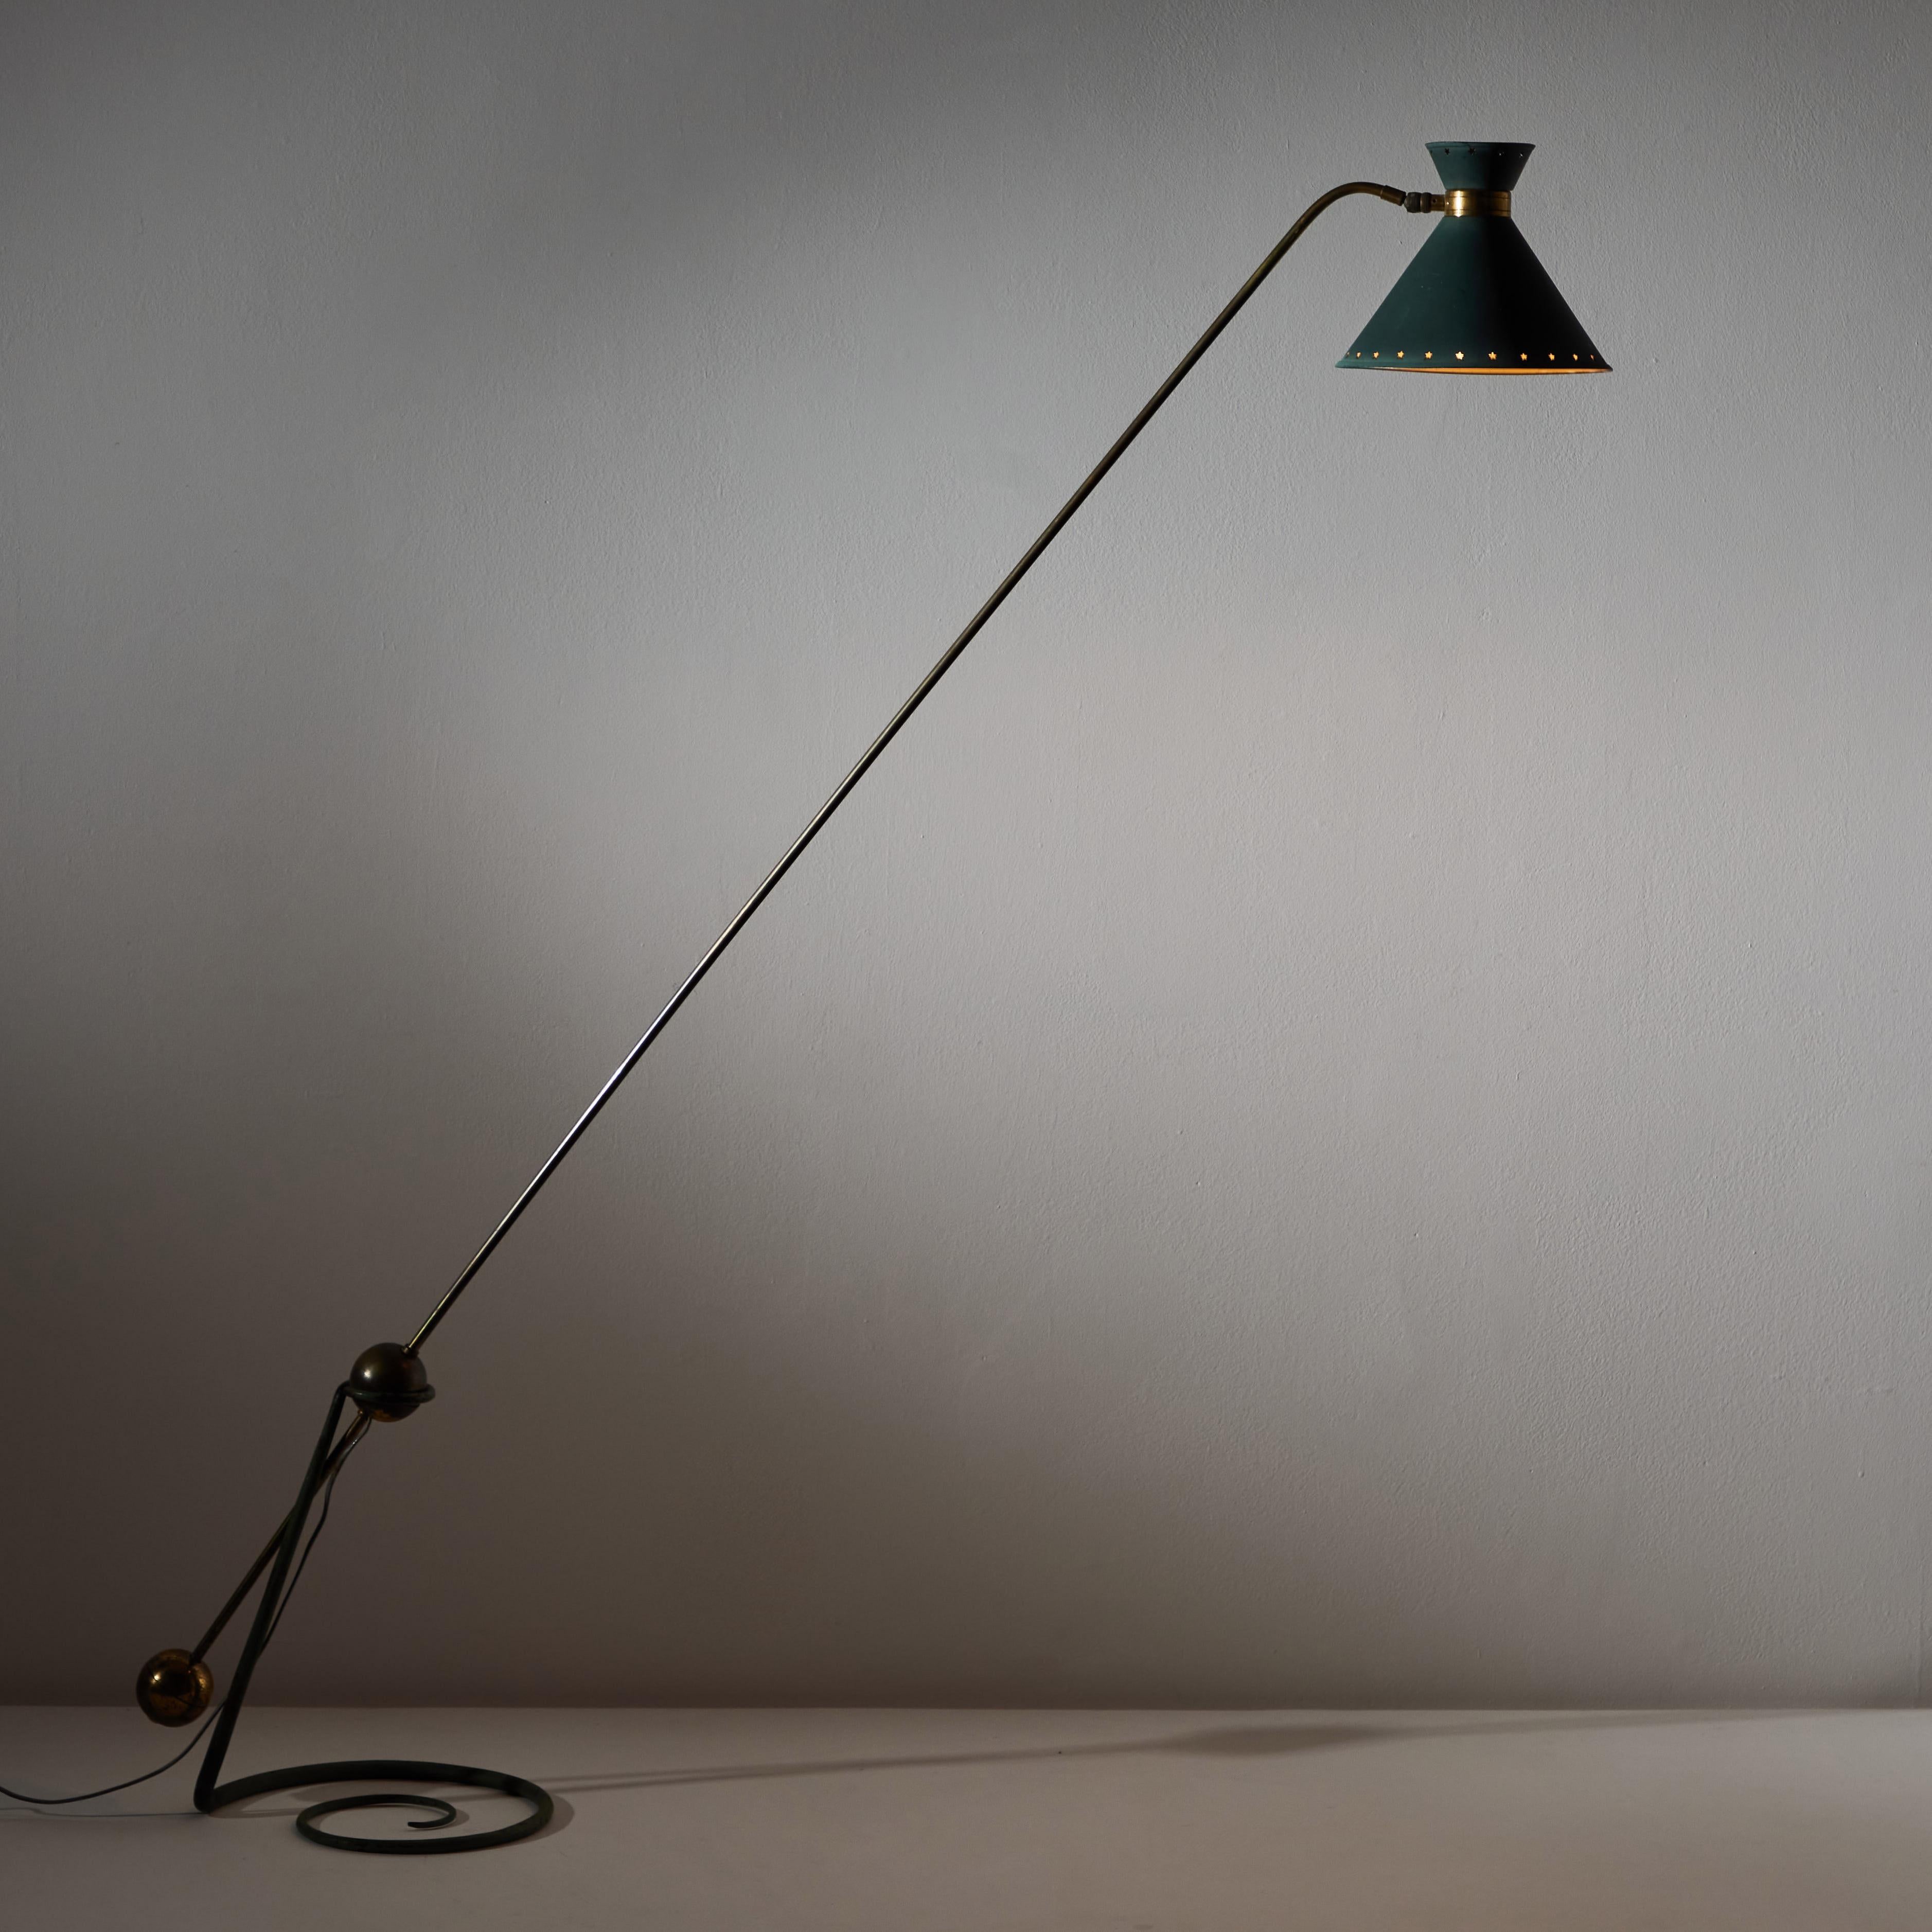 Painted Rare Counterbalance Floor Lamp by Arlus